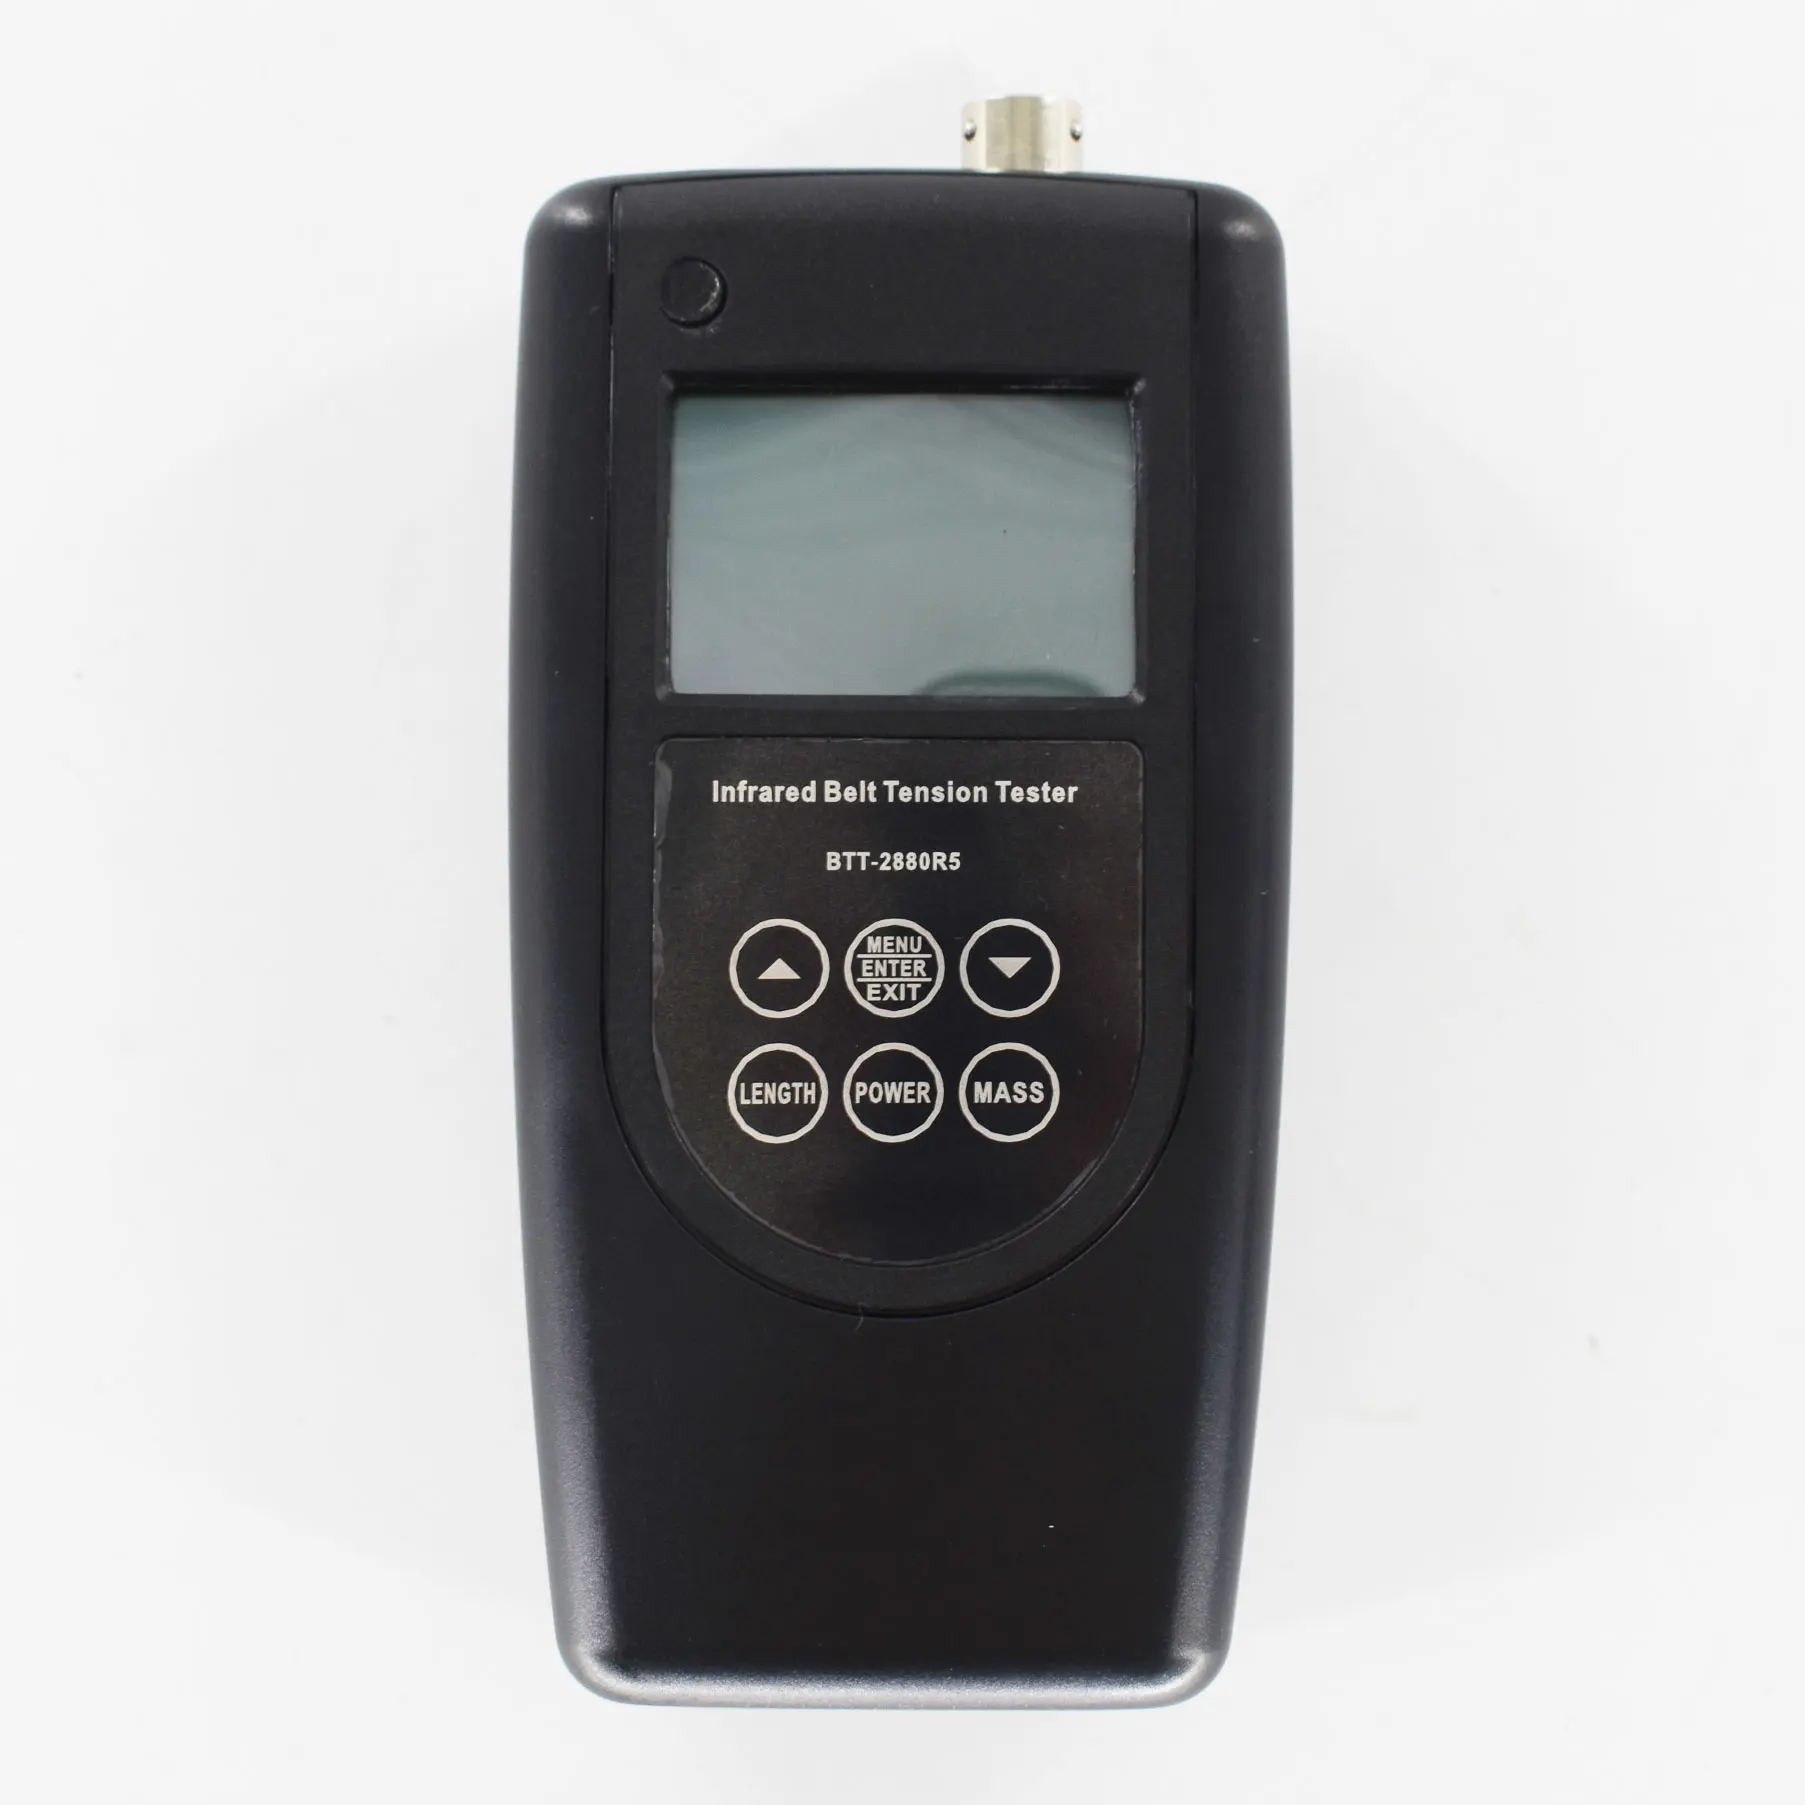 Accessories Use For Tension Tester BTT-2880R5 